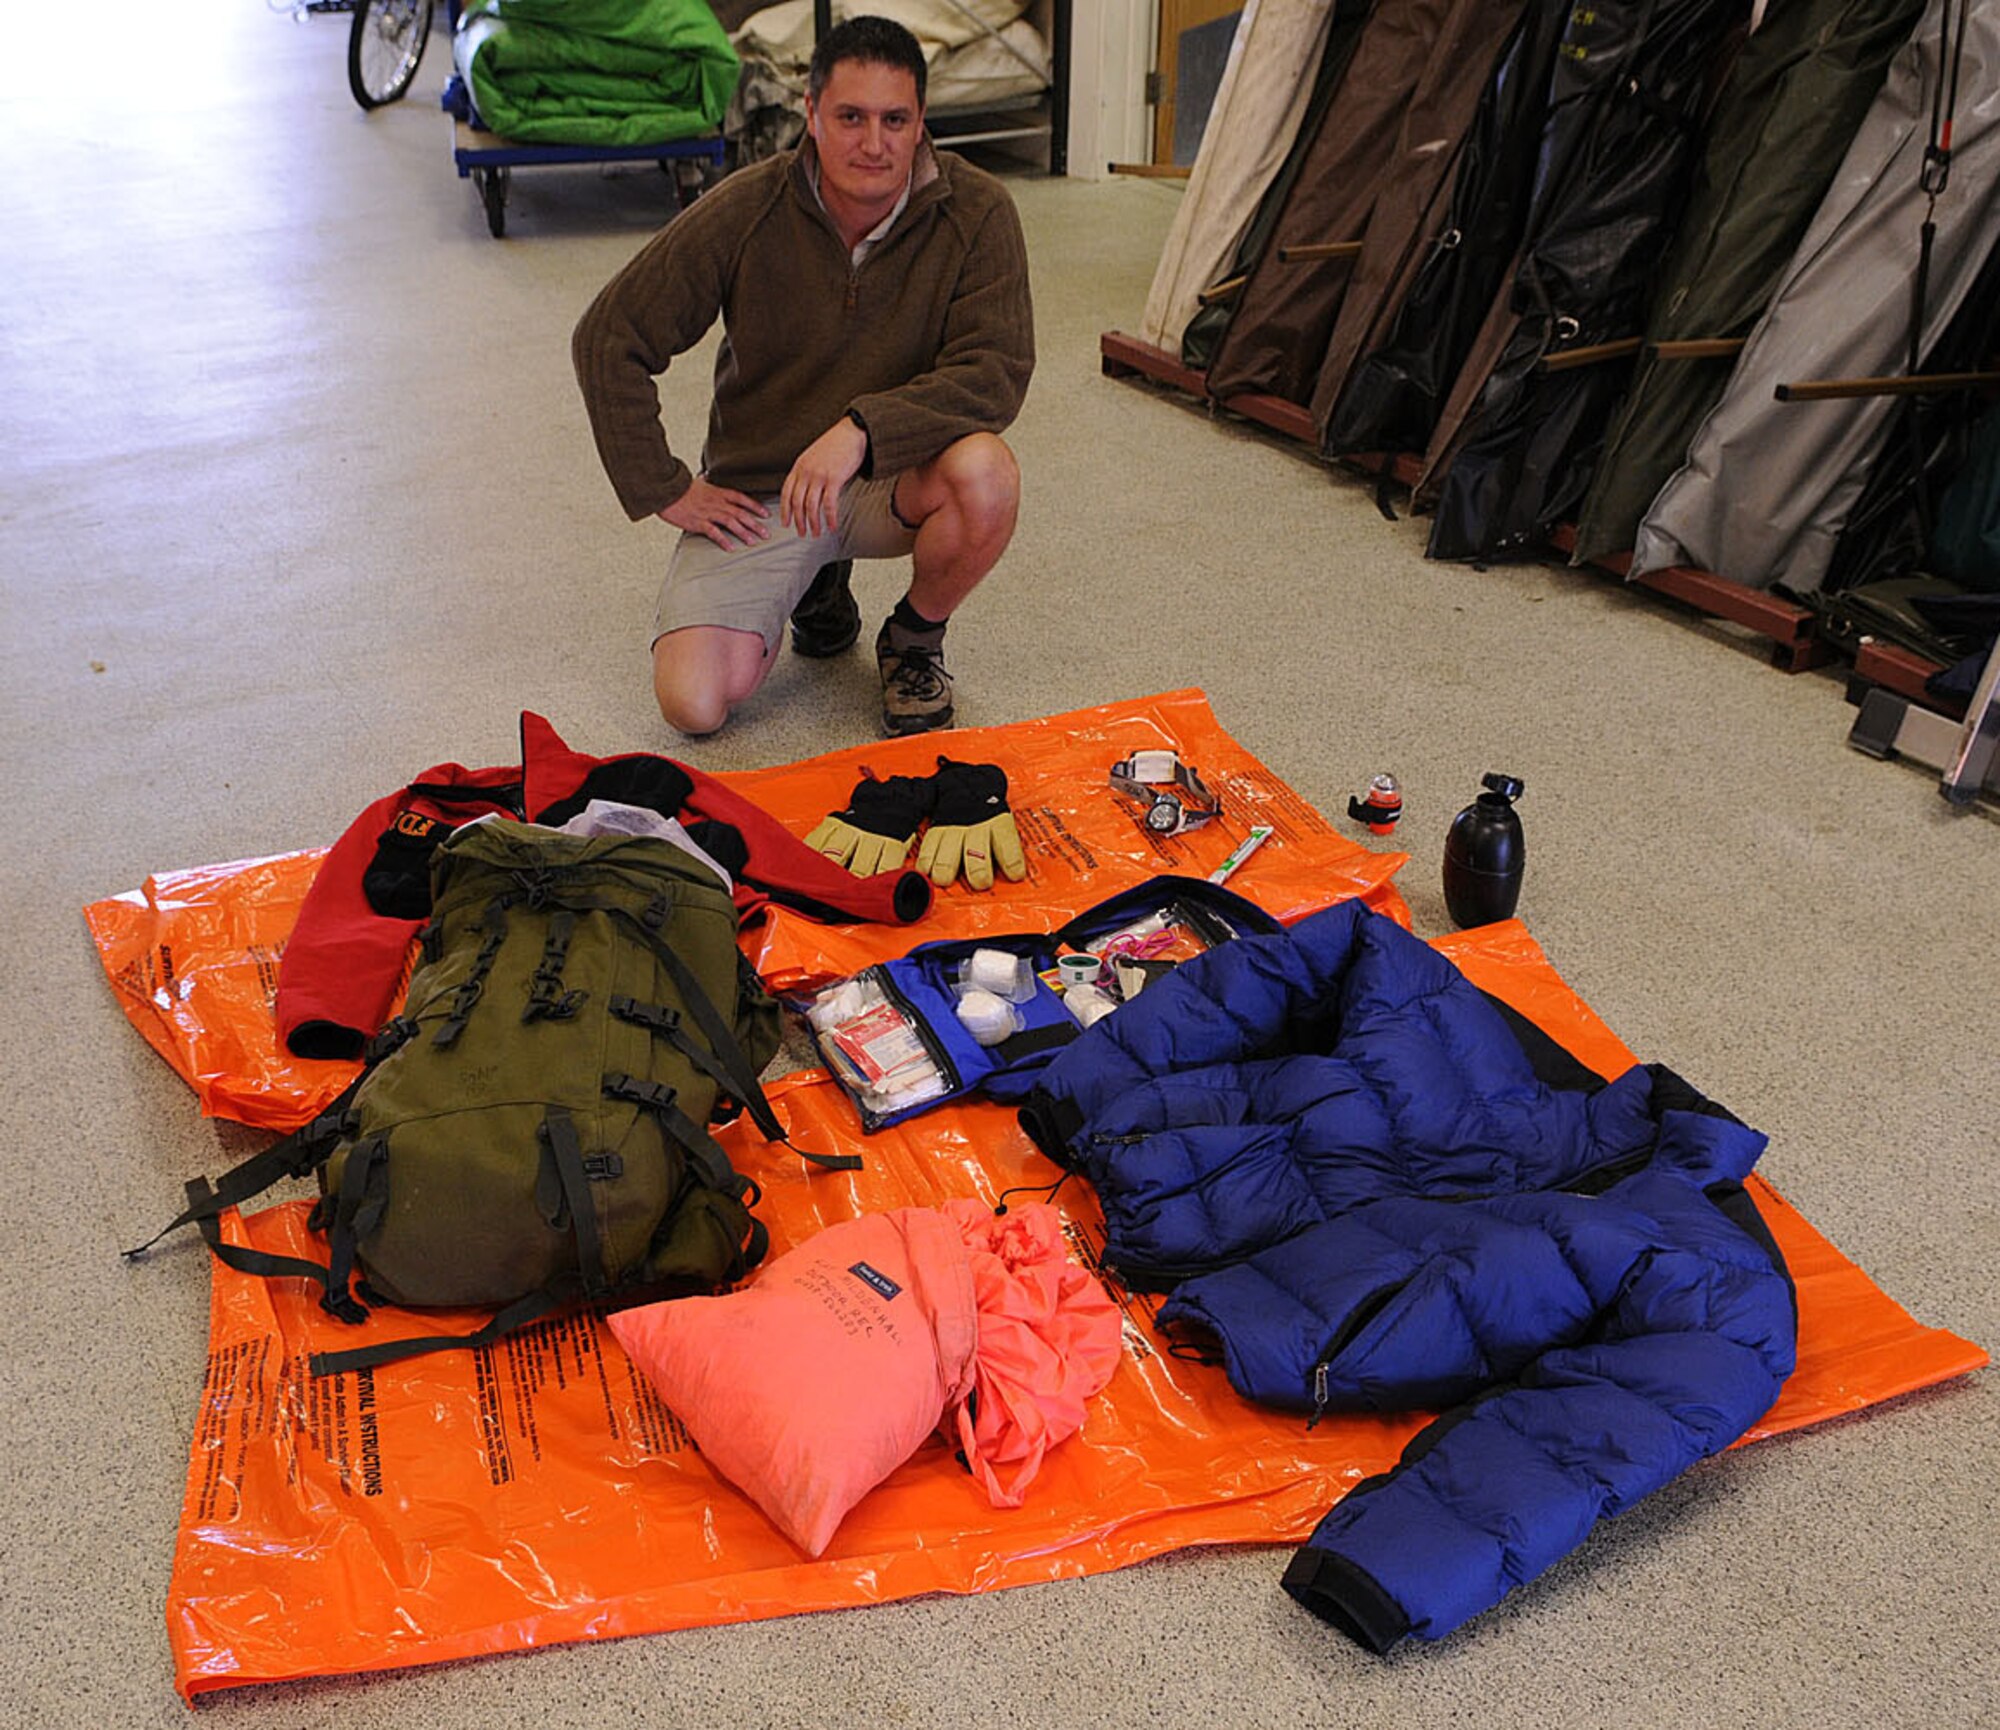 Dave Wainwright, 100th Force Support Squadron Outdoor Recreation director, and qualified mountain guide, shows off the survival equipment he and three British firefighters, Alan Coldwell, Chris Gould and Jerry Myles, took with them on the Three Peaks Challenge Oct. 2 and 3. Using this equipment, the four men saved another man's life when they found him alone and unconscious at the top of Mount Snowdon. the man was suffering from hypothermia and frostbite, and the men from RAF Mildenhall put him in their spare clothes and jackets and wrapped him in the orange bivi bags to keep him warm while they called the North Wales Police and mountain rescue. (U.S. Air Force photo by Staff Sgt. Jerry Fleshman)